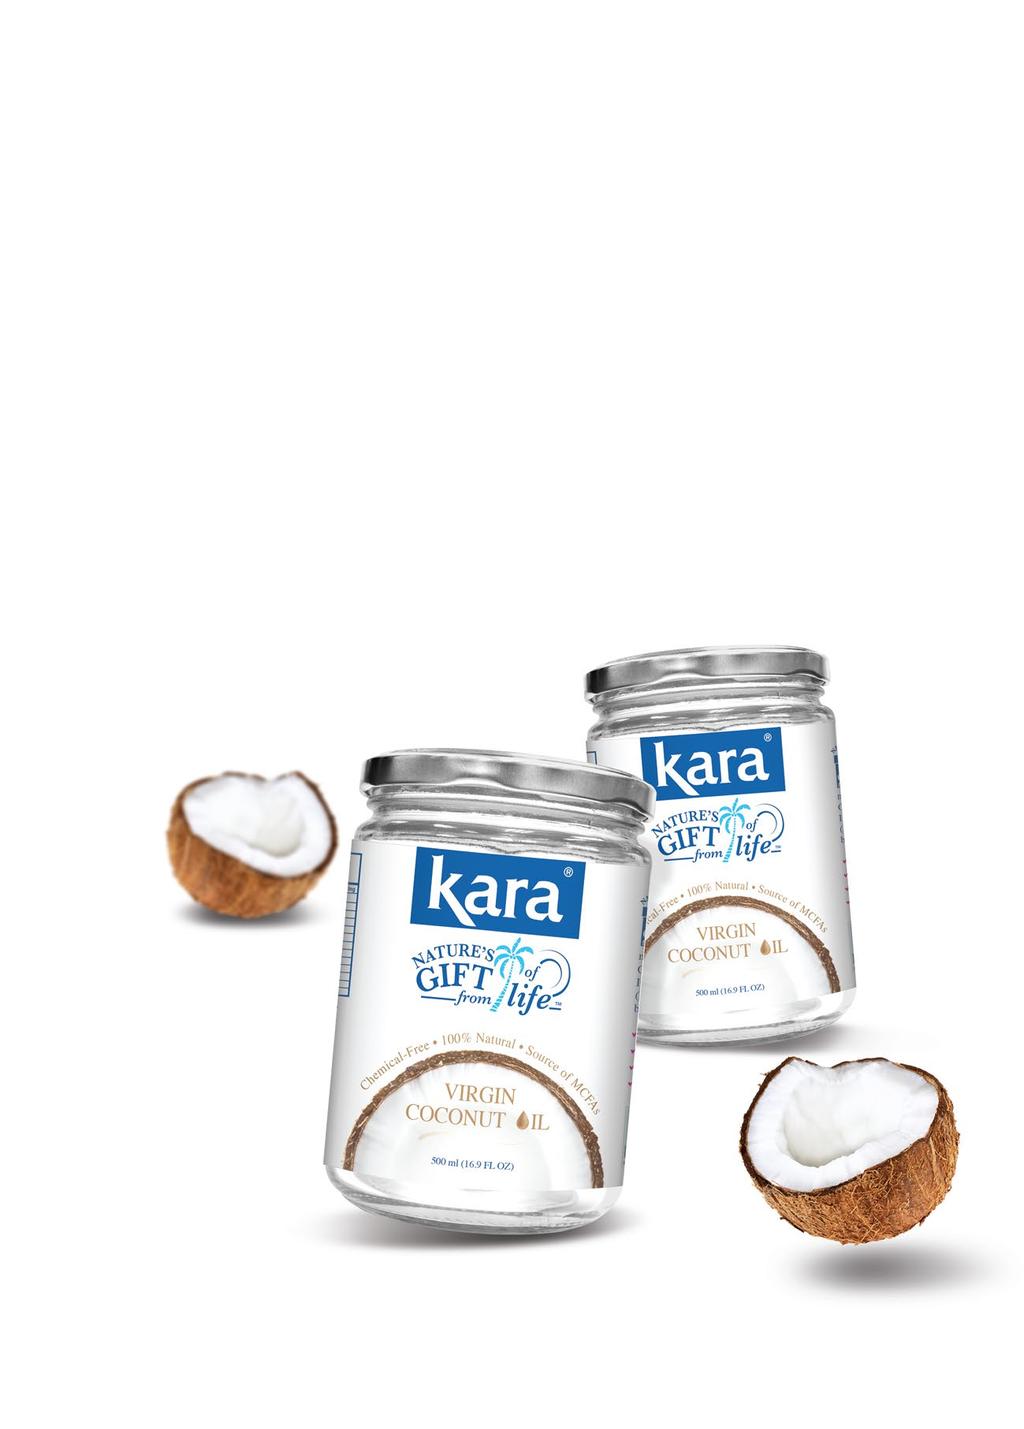 Kara Virgin Coconut Oil Nature s Gift from the Tree of Life Extracted from fresh coconut material of non-copra source, Kara Virgin Coconut Oil is chemical-free and 100% natural.